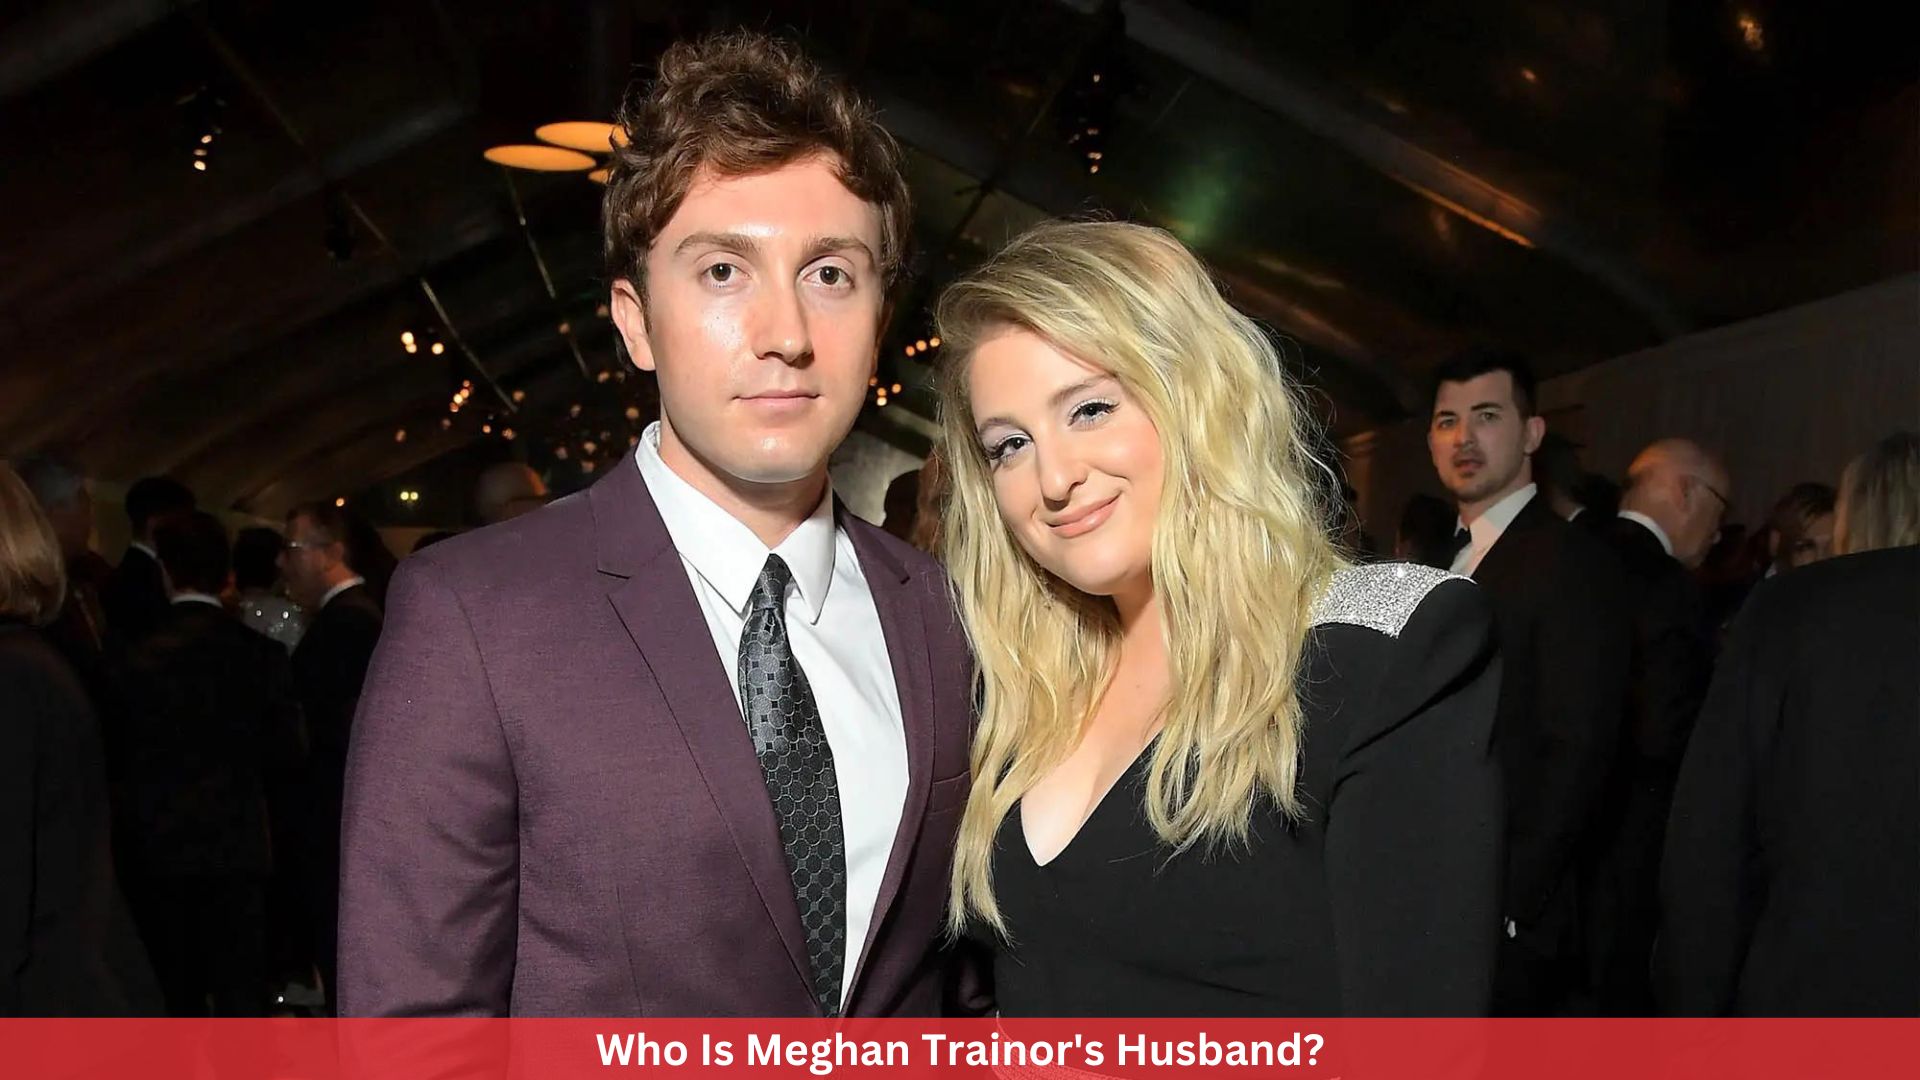 Who Is Meghan Trainor's Husband? Complete Relationship Timeline!